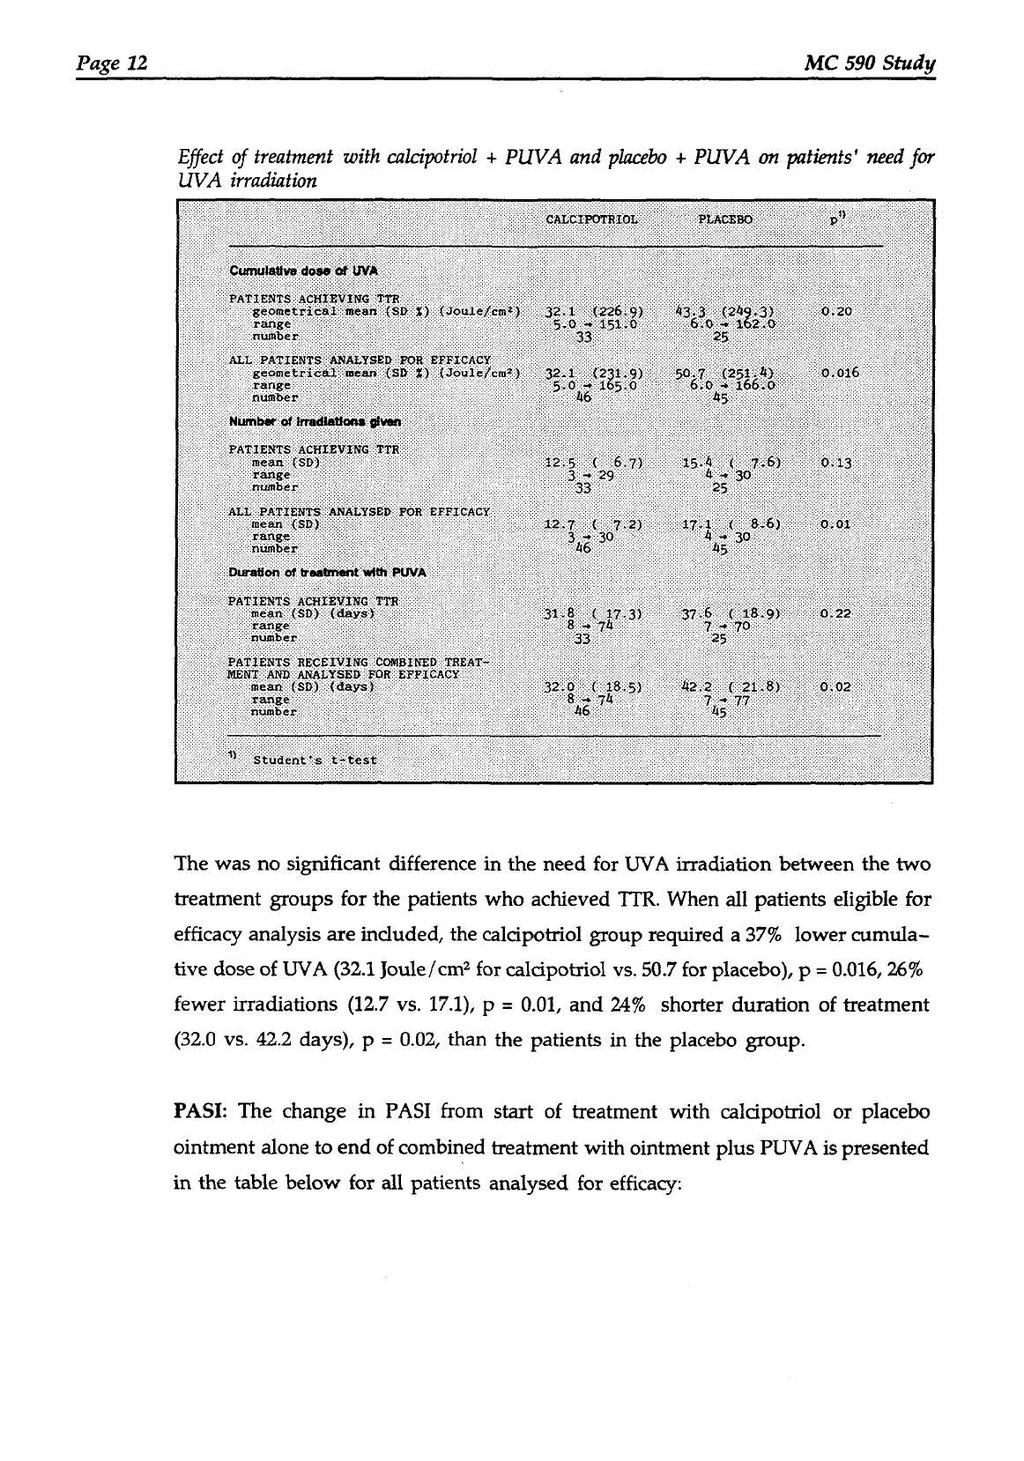 Page 12 MC 590 Study Effed of treatment with calcipotriol + PUV A and placebo + PUV A on patients' need for UV A irradiation The was no significant difference in the need for UV A irradiation between